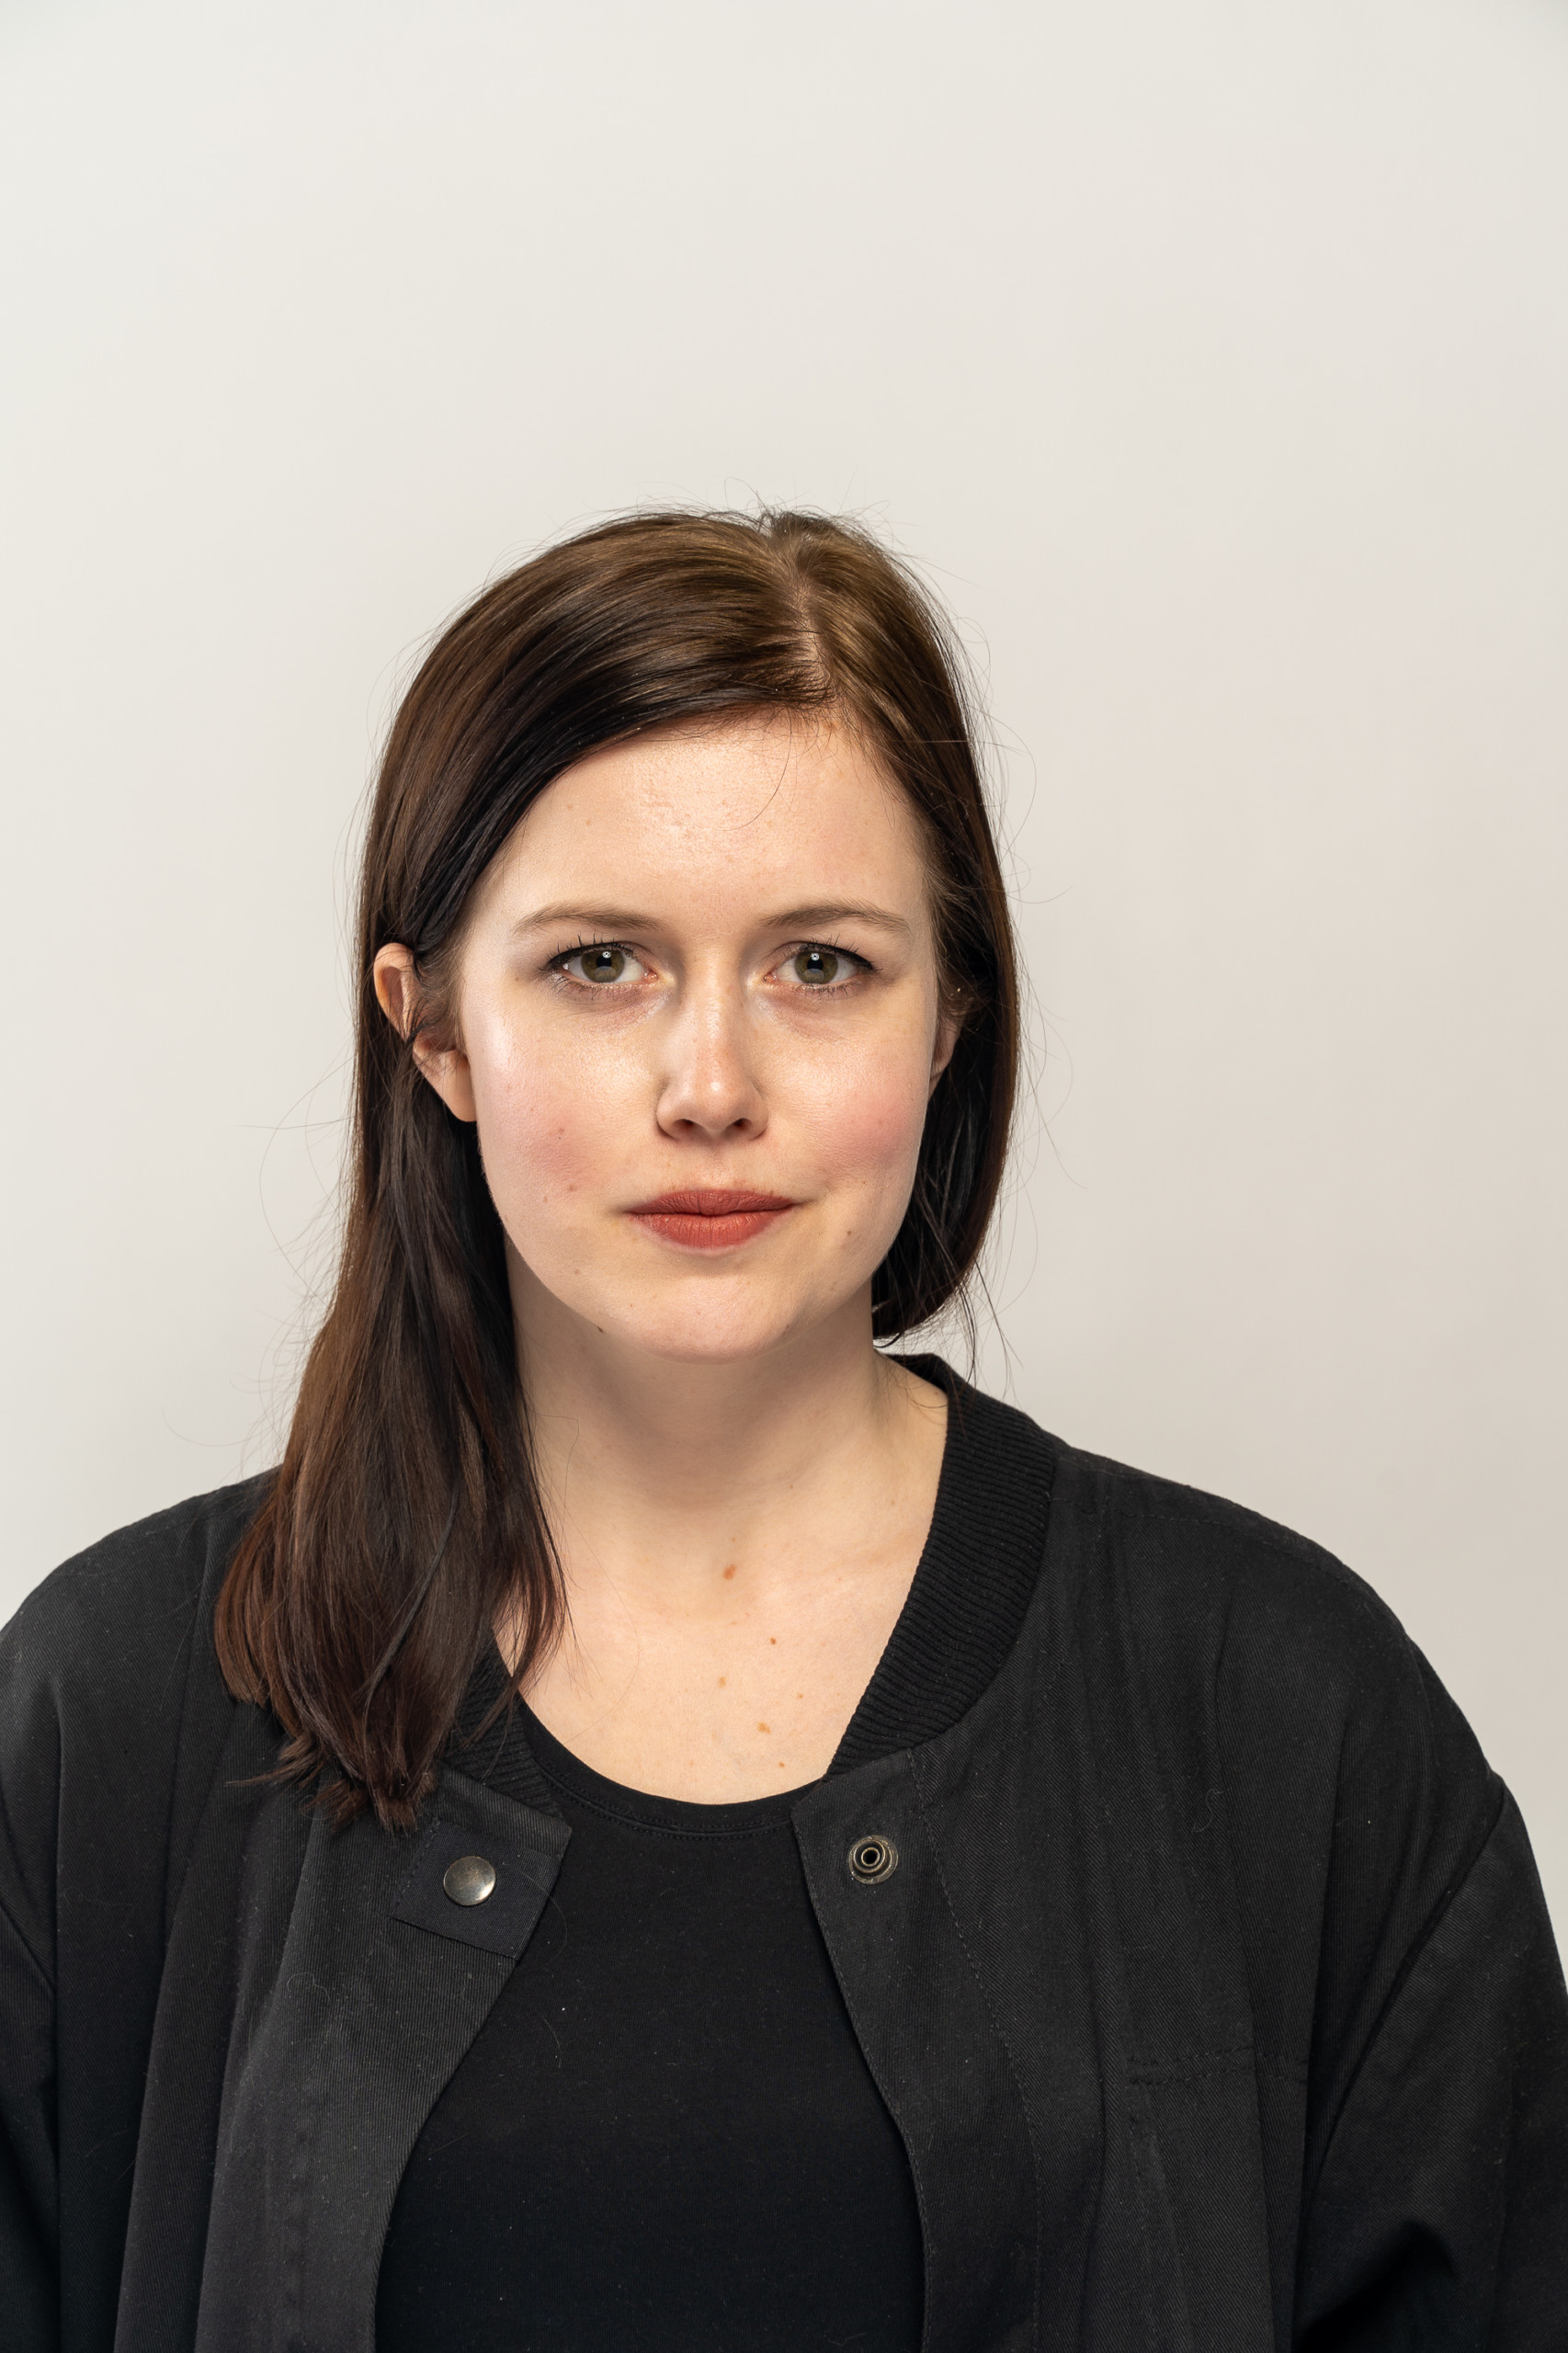 Kaarin Kivirähk, a white-skinned person with long dark brown hair and dark red lipstick. Framed from chest up, Kaarin is wearing a black shirt and a black sweater. Kaarin is standing in front of a white backdrop.